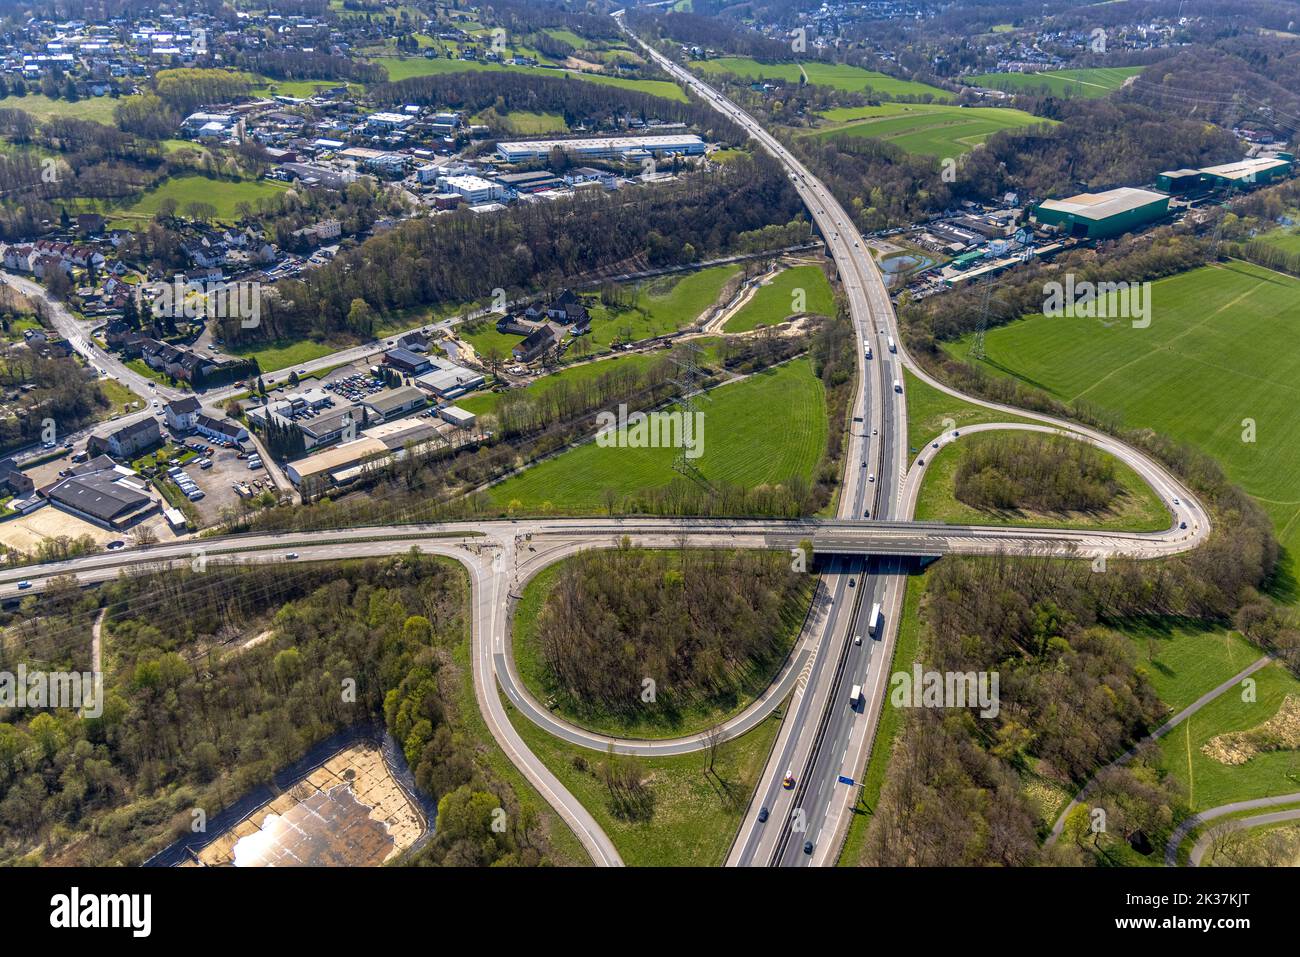 Aerial view, industrial area Wittener Straße, freeway A43 with junction Witten-Herbede, renaturation of the Kamperbach, Westherbede, Witten, Ruhr area Stock Photo